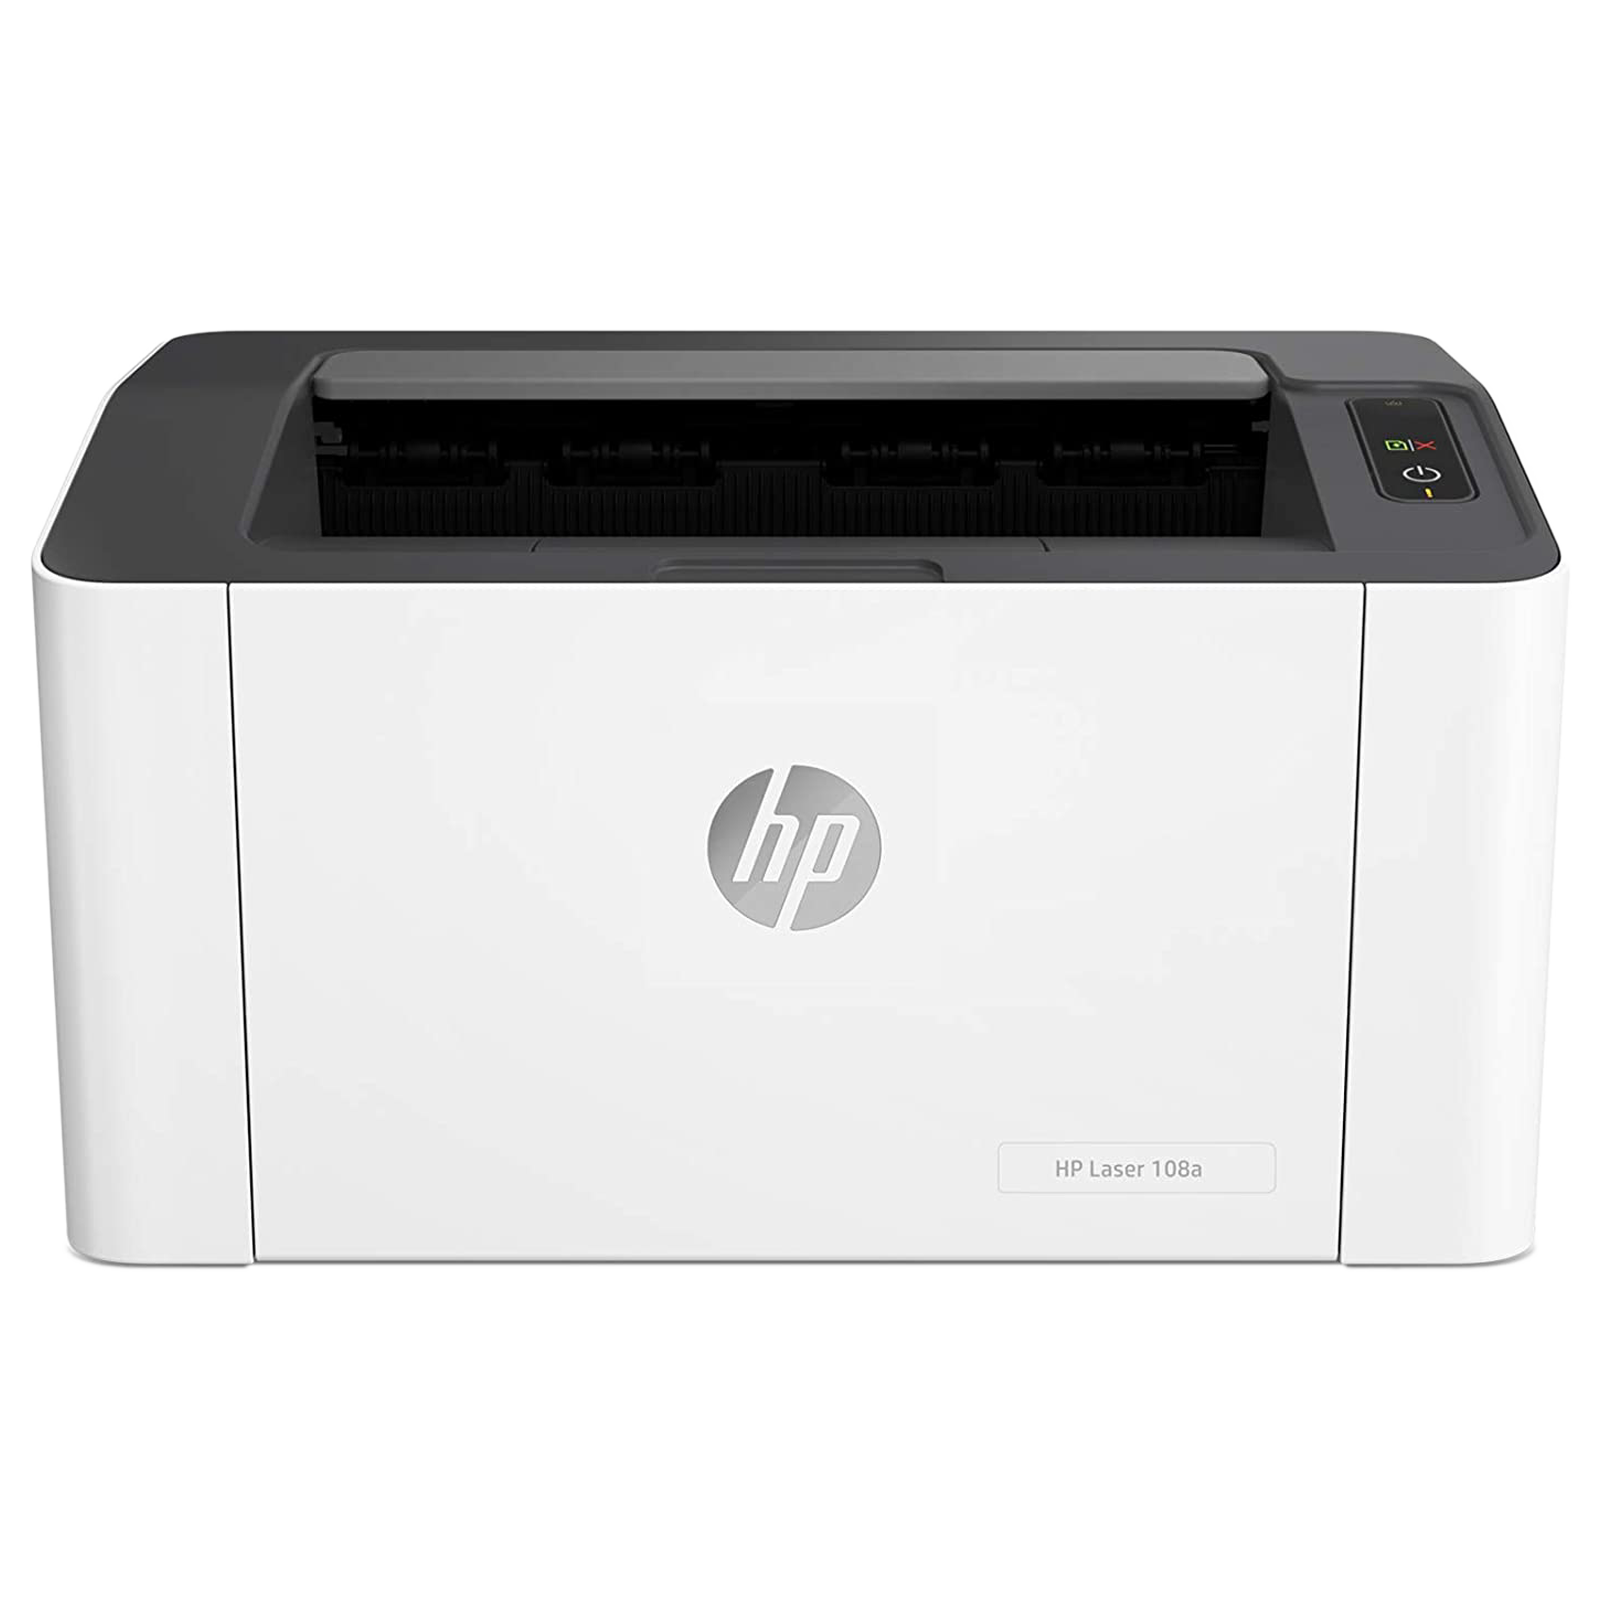 HP Laser 108a Wired Black and White Laserjet Printer (USB 2.0 Connectivity, 4ZB79A, Grey)_1